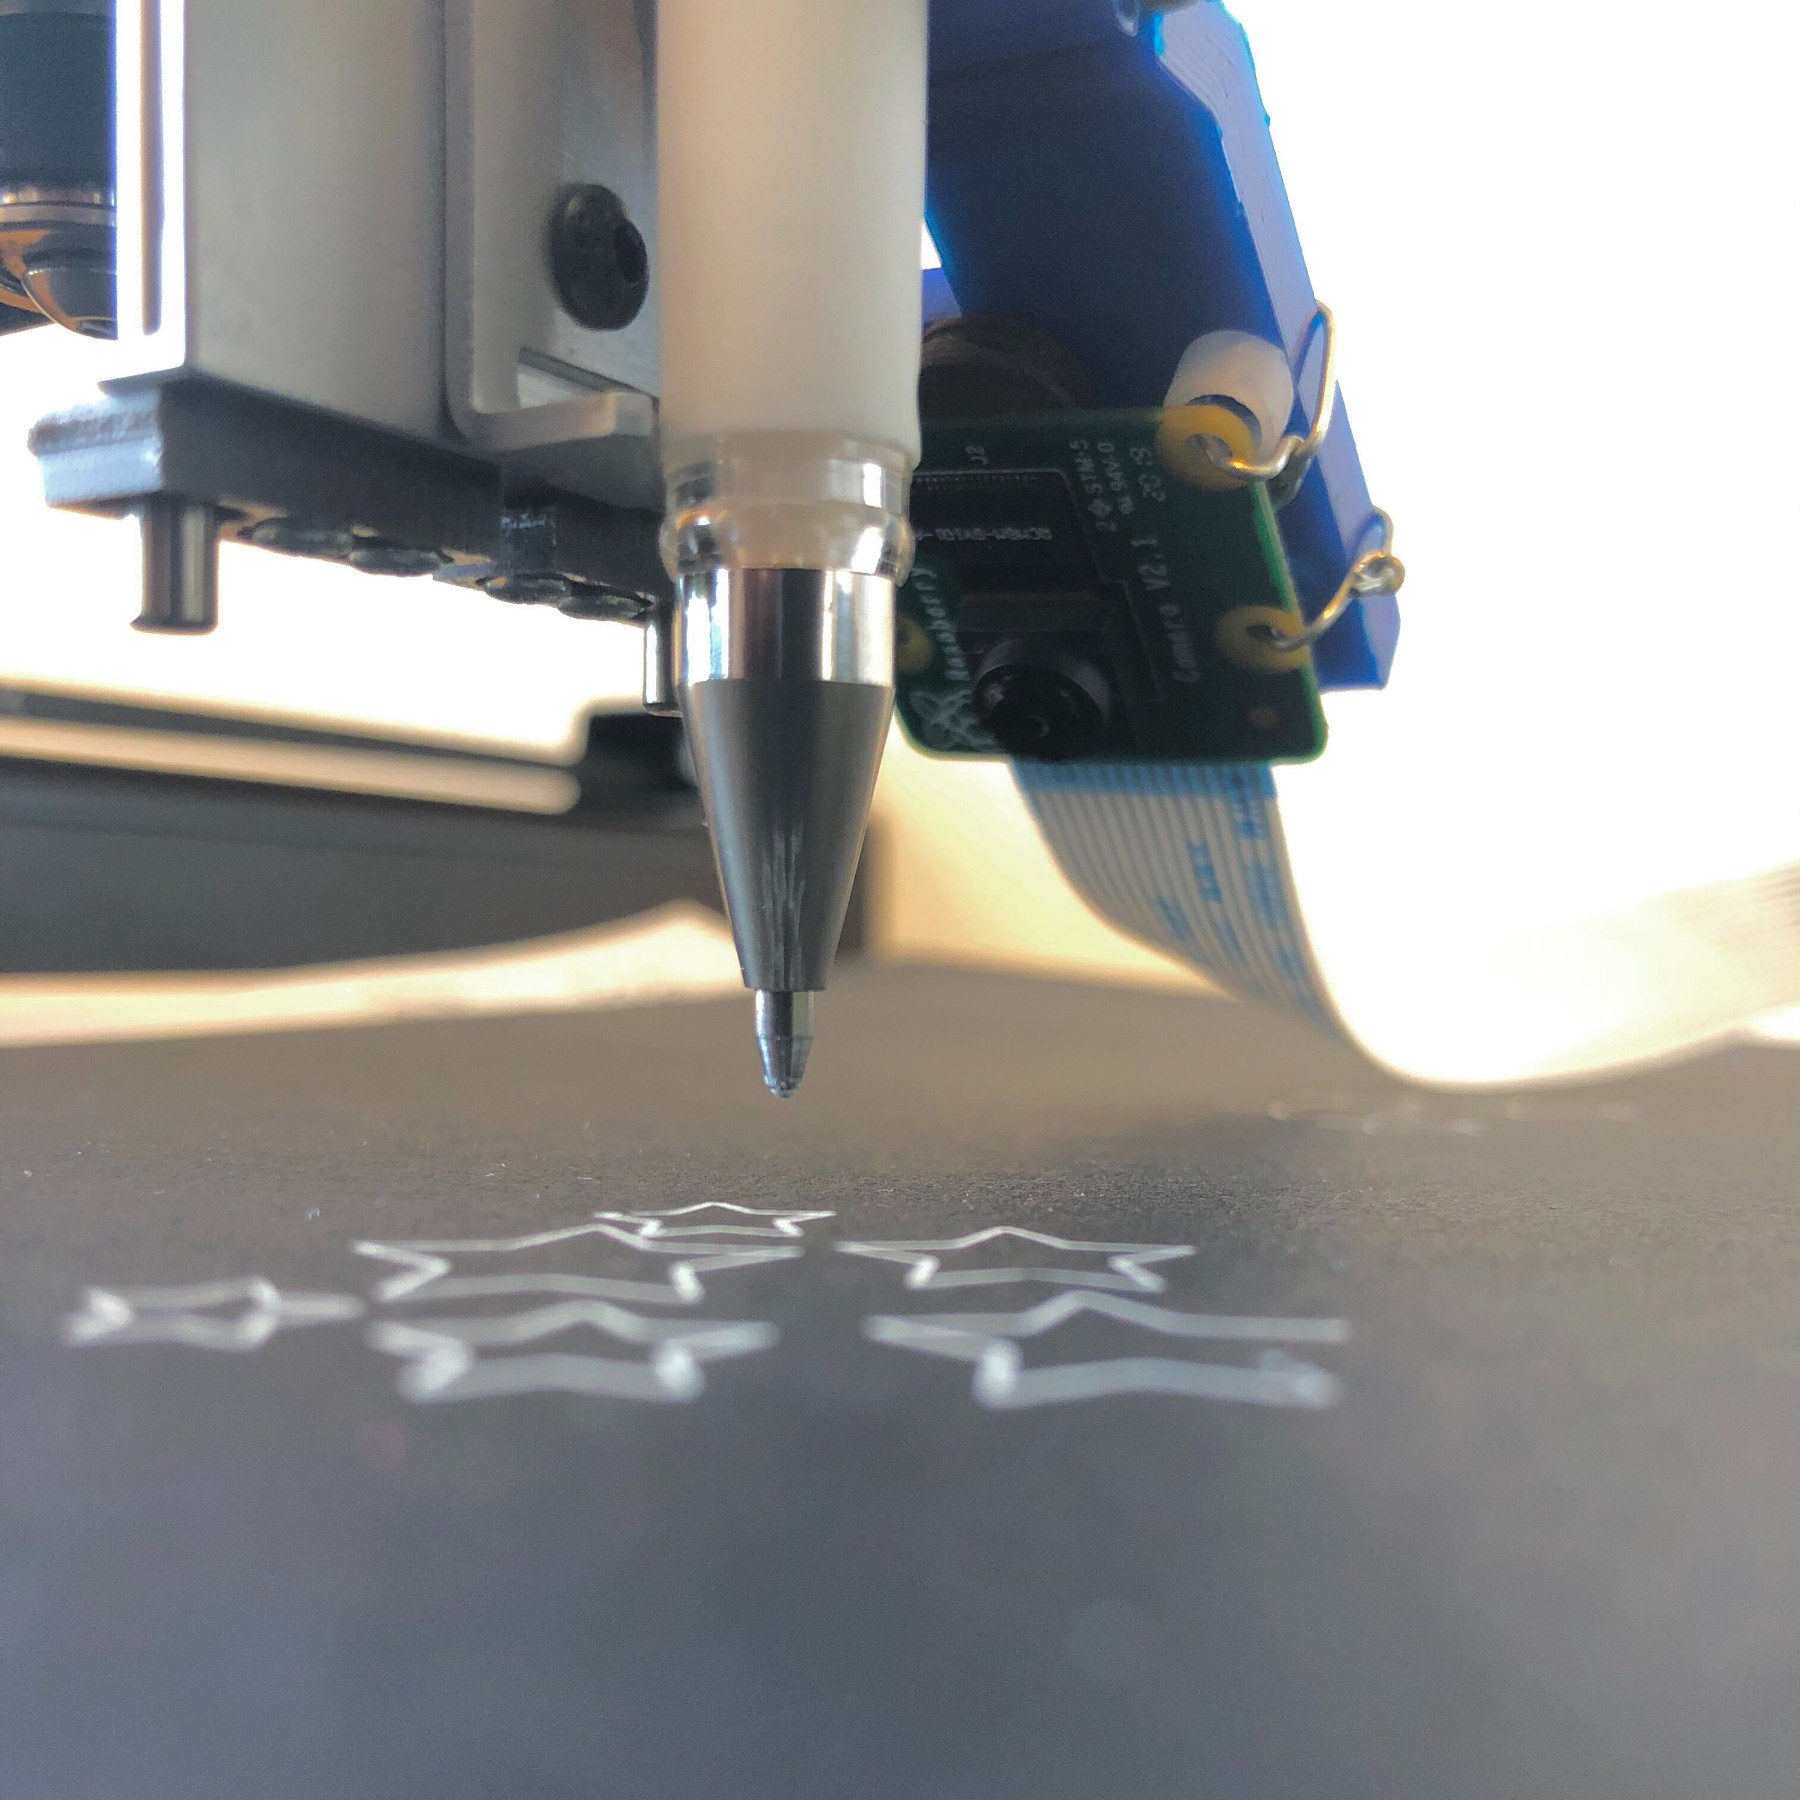 The contraption mounted on AxiDraw plotter